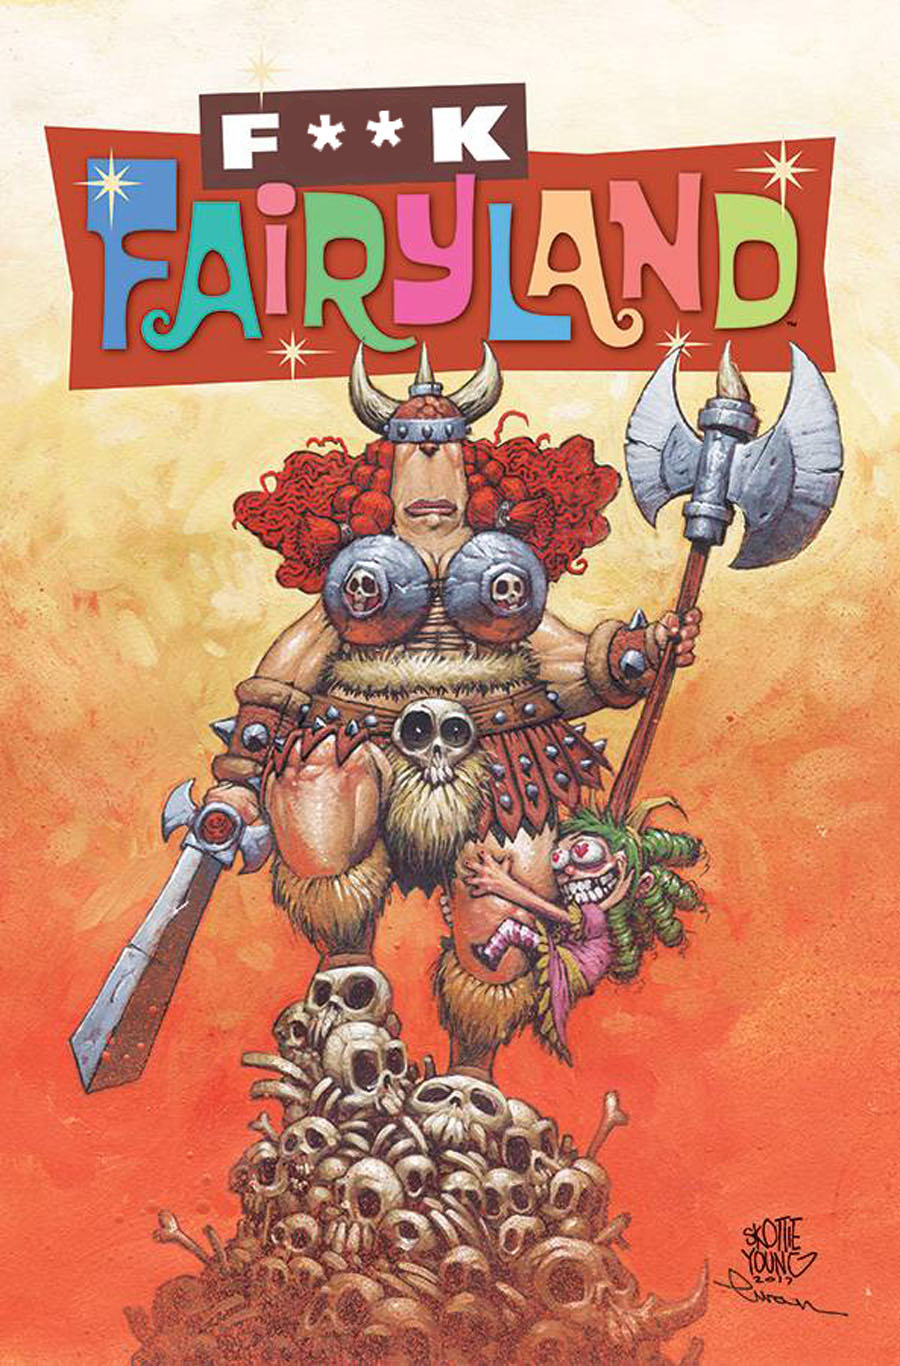 I Hate Fairyland #11 Cover B Variant Skottie Young F*ck Fairyland Cover